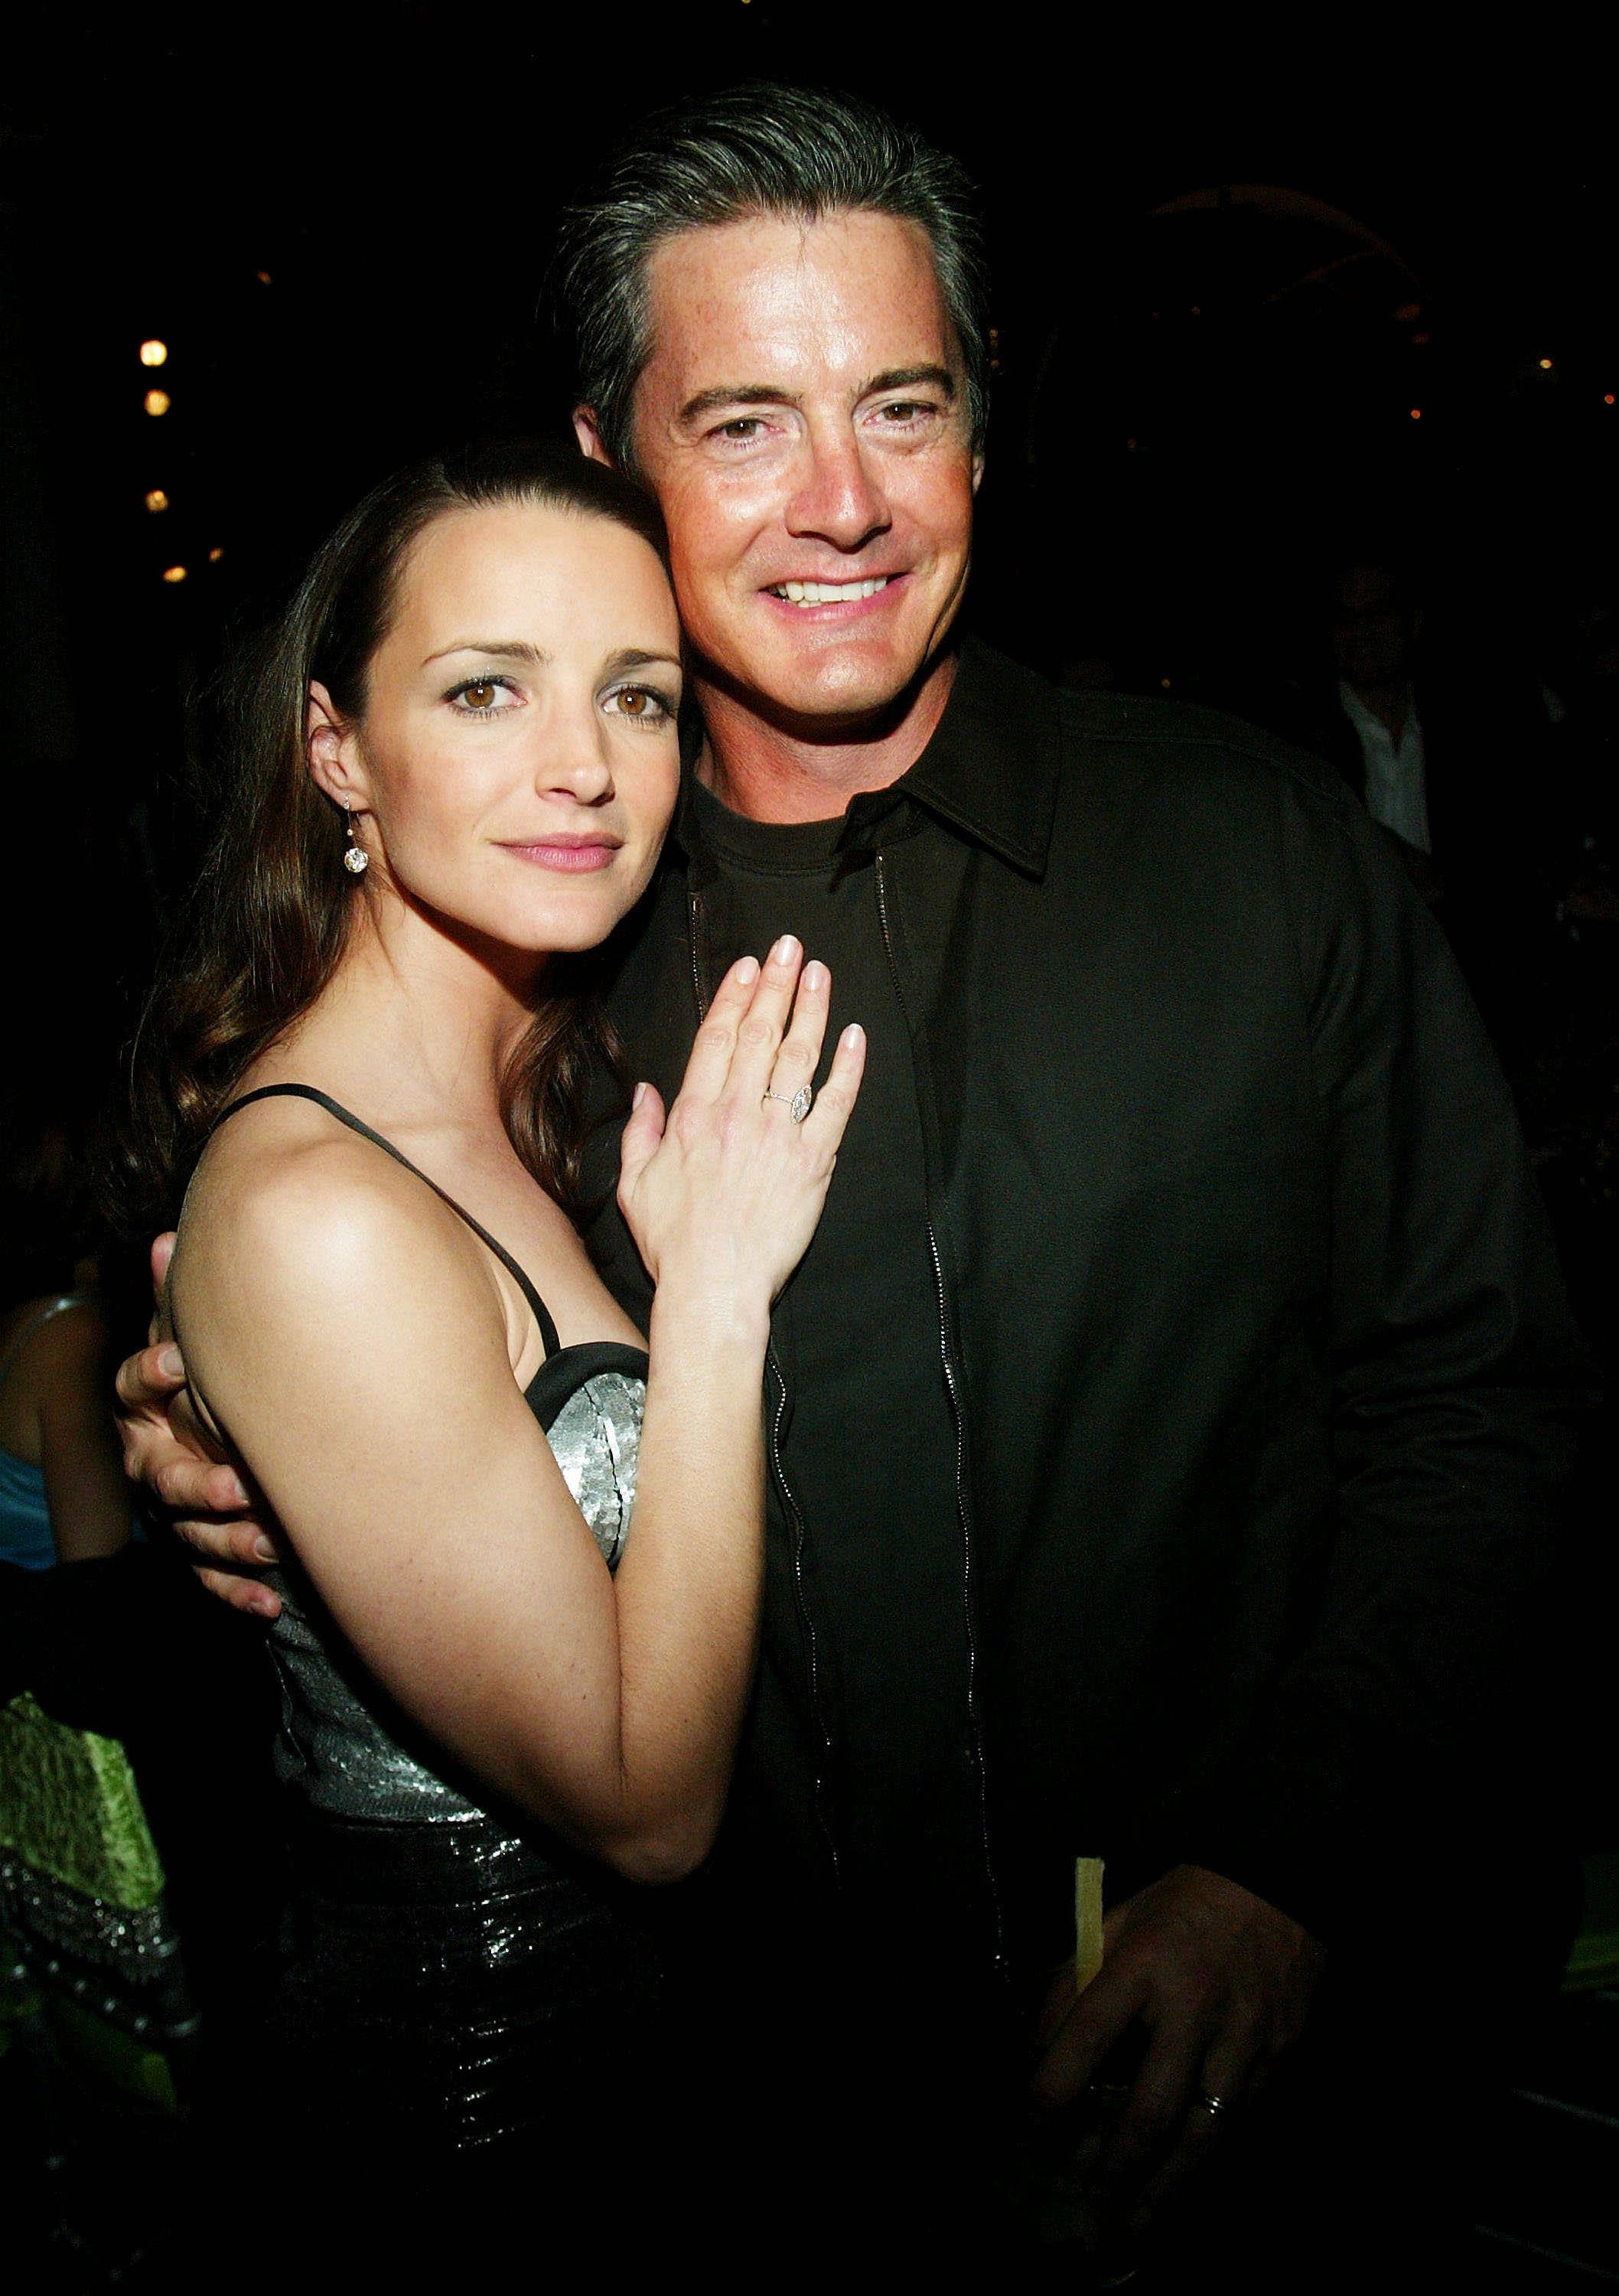 Kristin Davis (Charlotte York) and Kyle MacLachlan (Trey MacDougal) attend the premiere of 'Sex and the City', season 4 in New York City